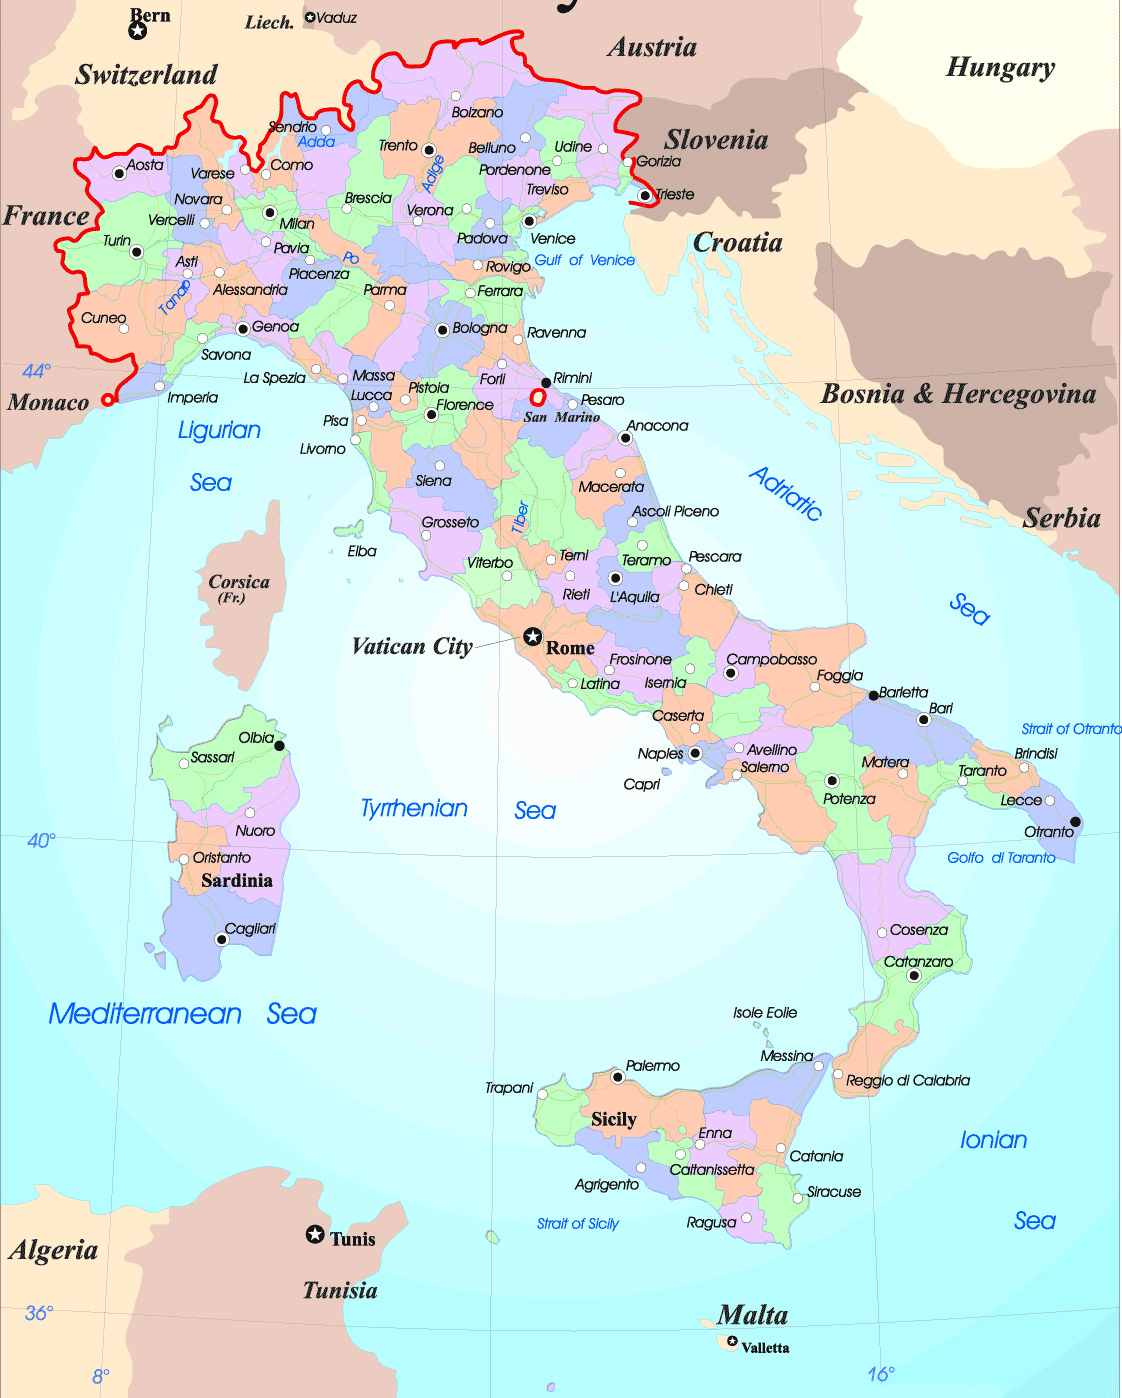 large-detailed-political-and-administrative-map-of-italy-with-major